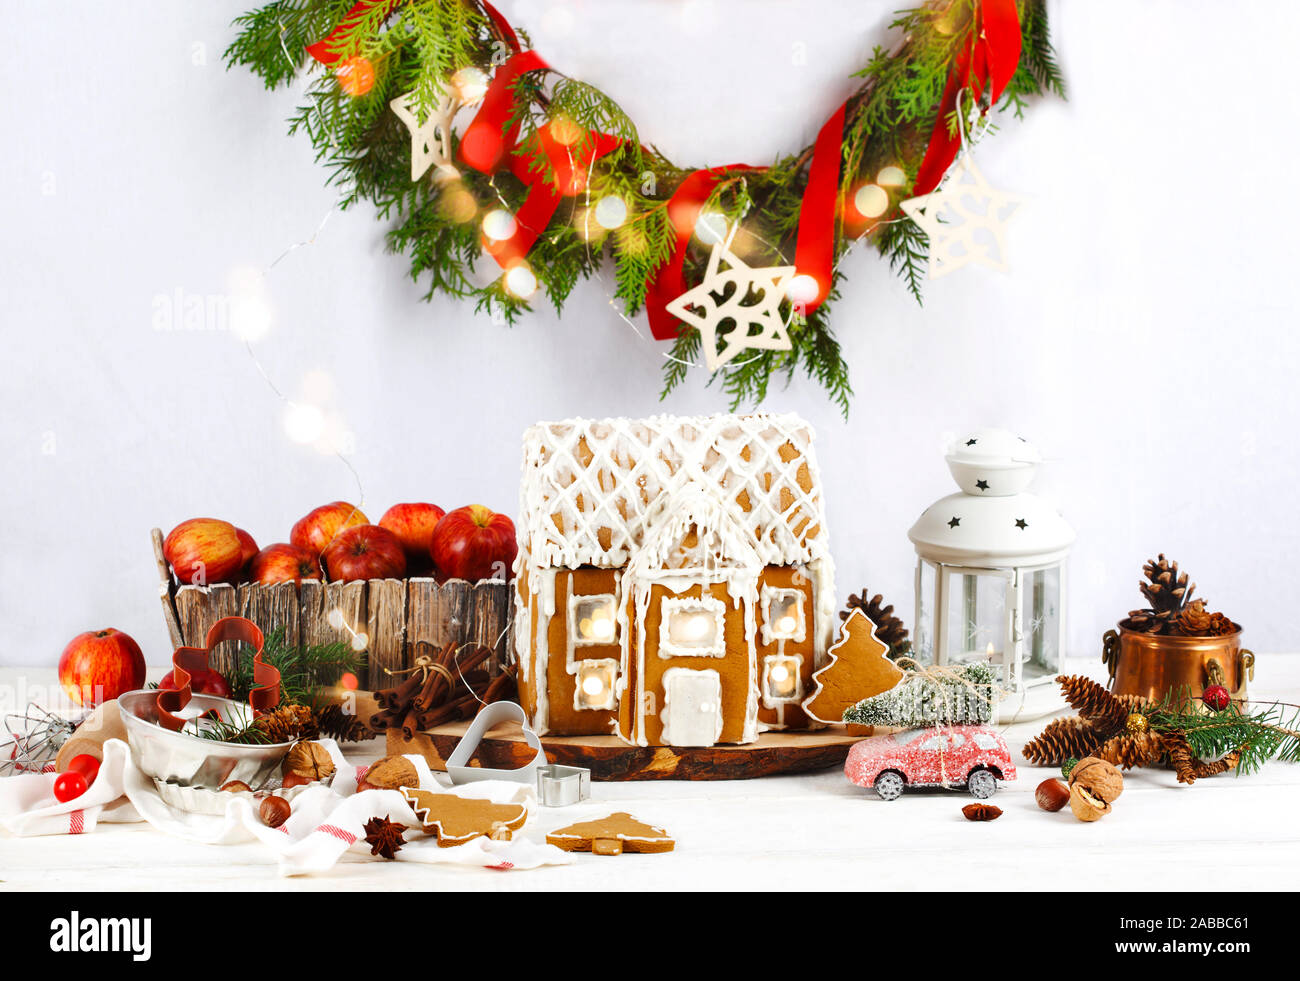 Gingerbread house on wooden table with a wreath and holiday decorations Stock Photo